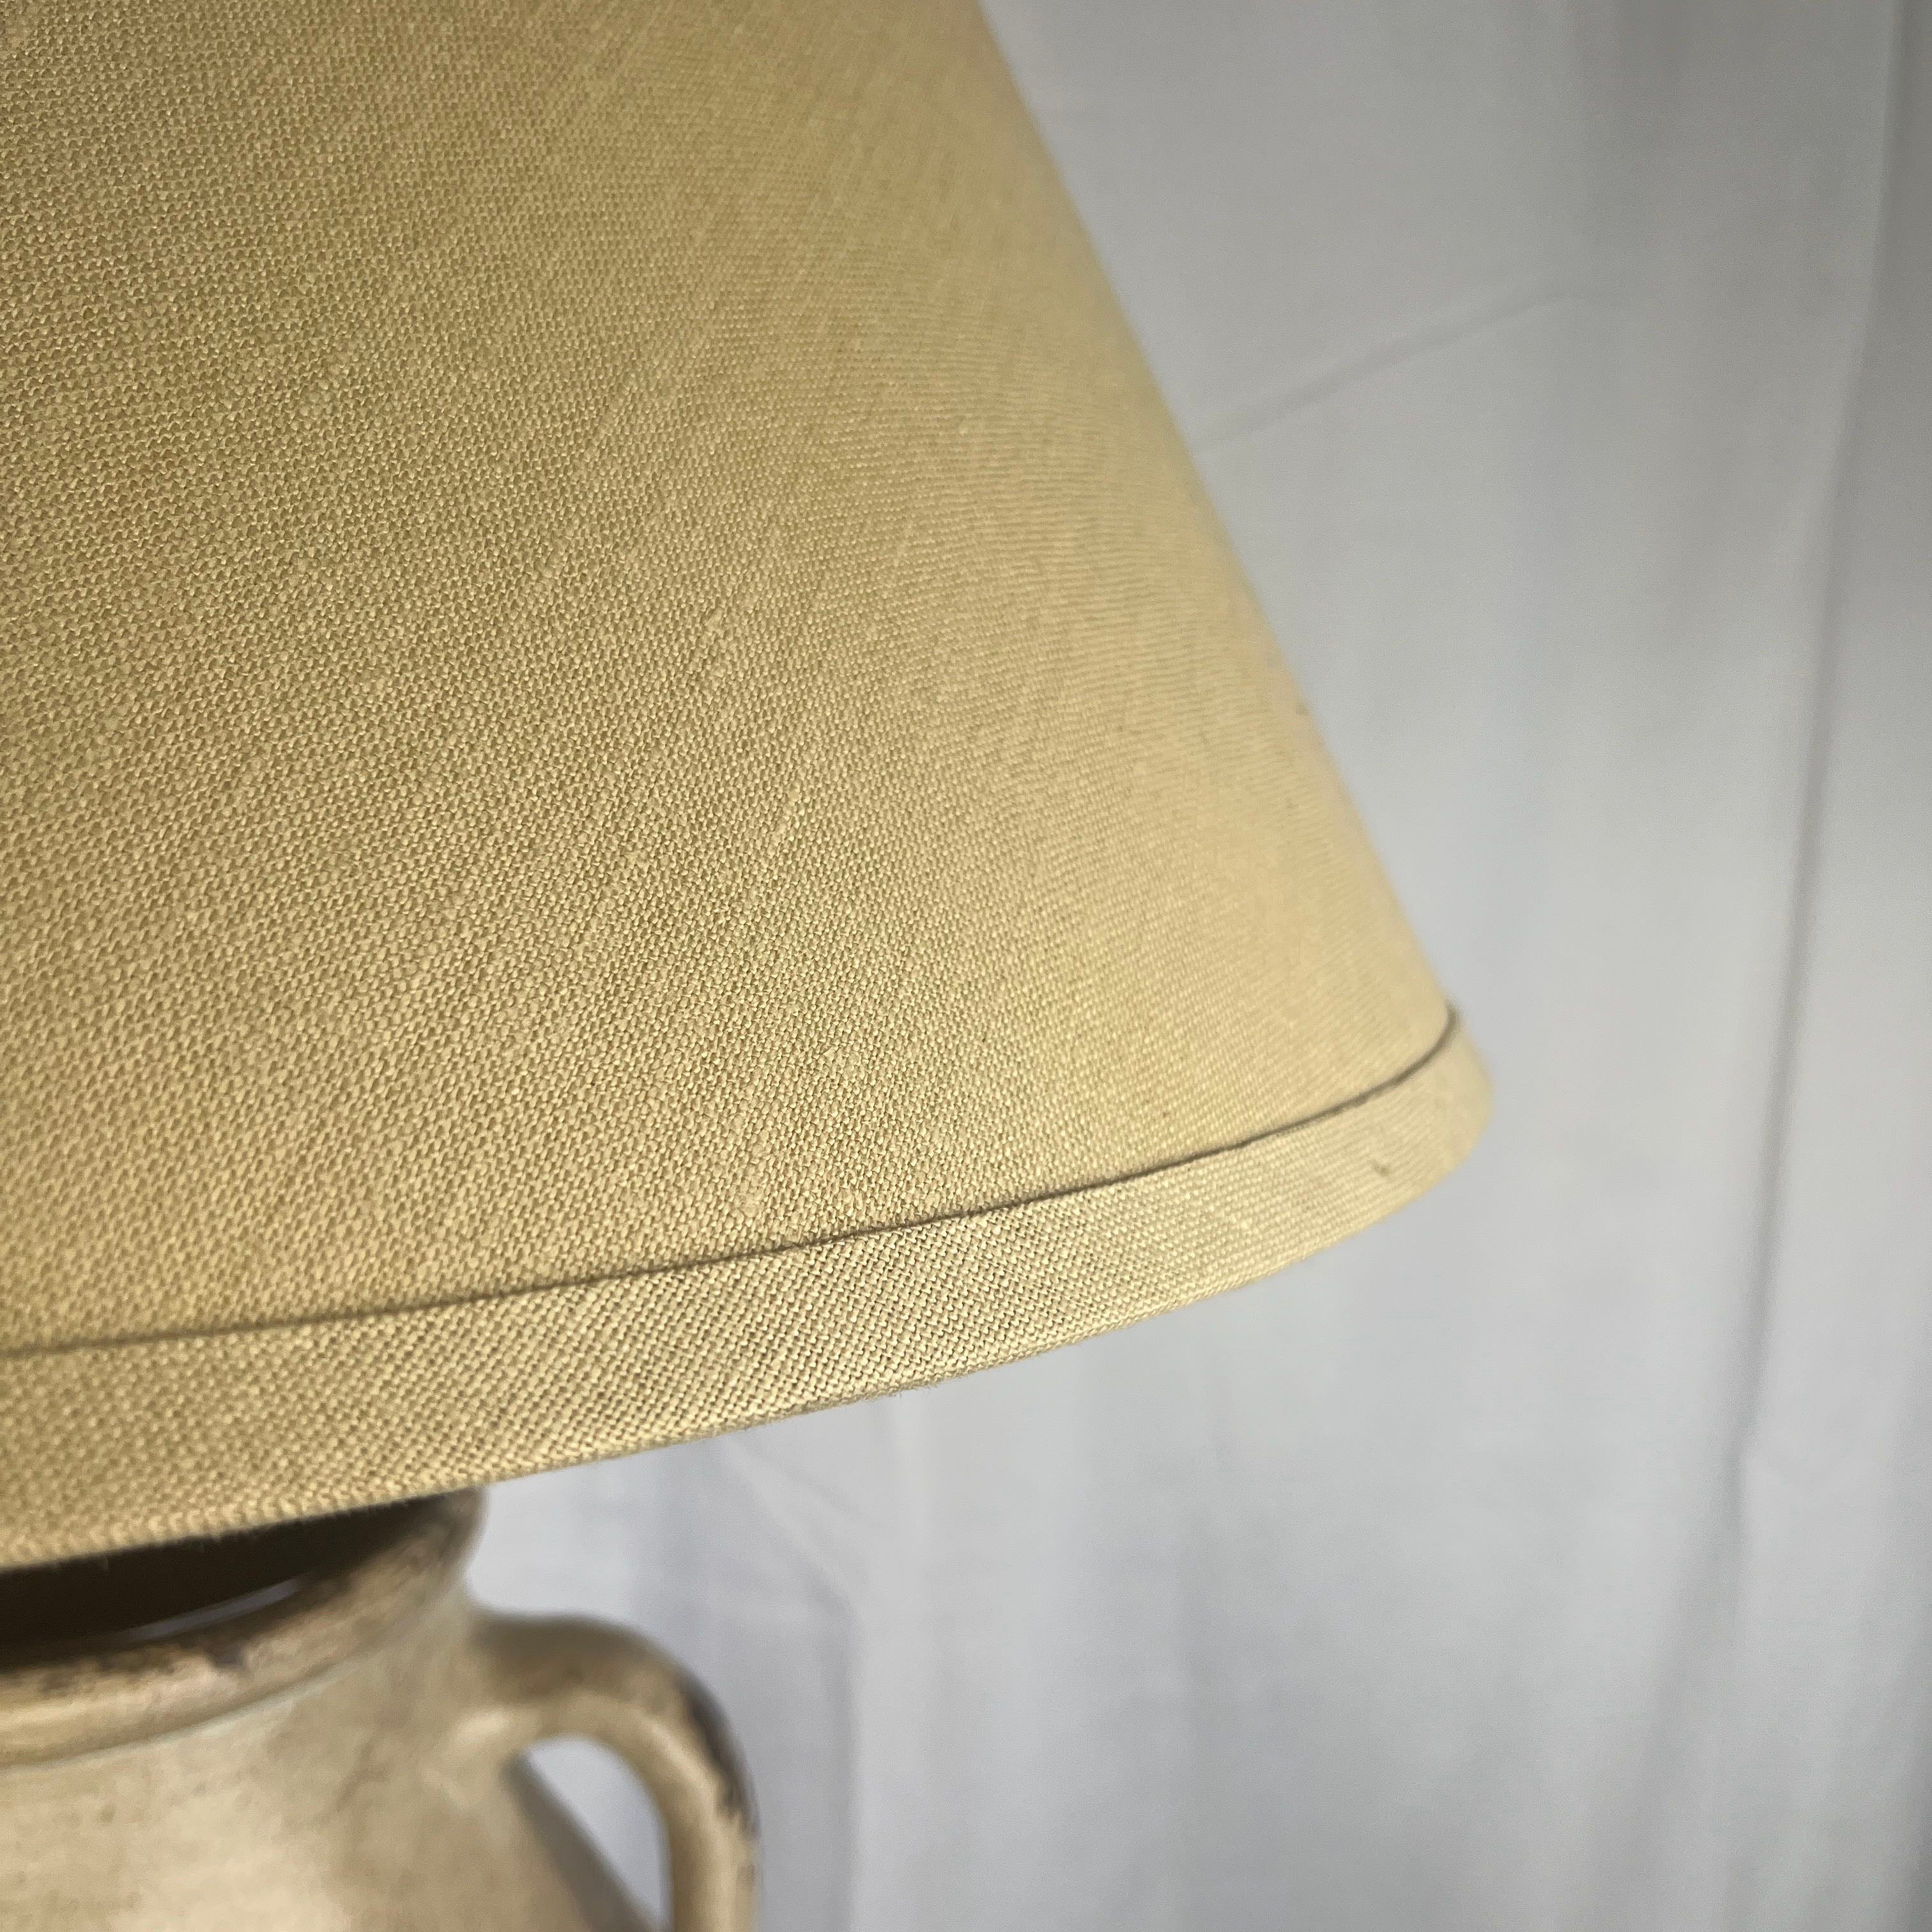 Magnus Pottery Handmade Taupe Clay Table Lamp